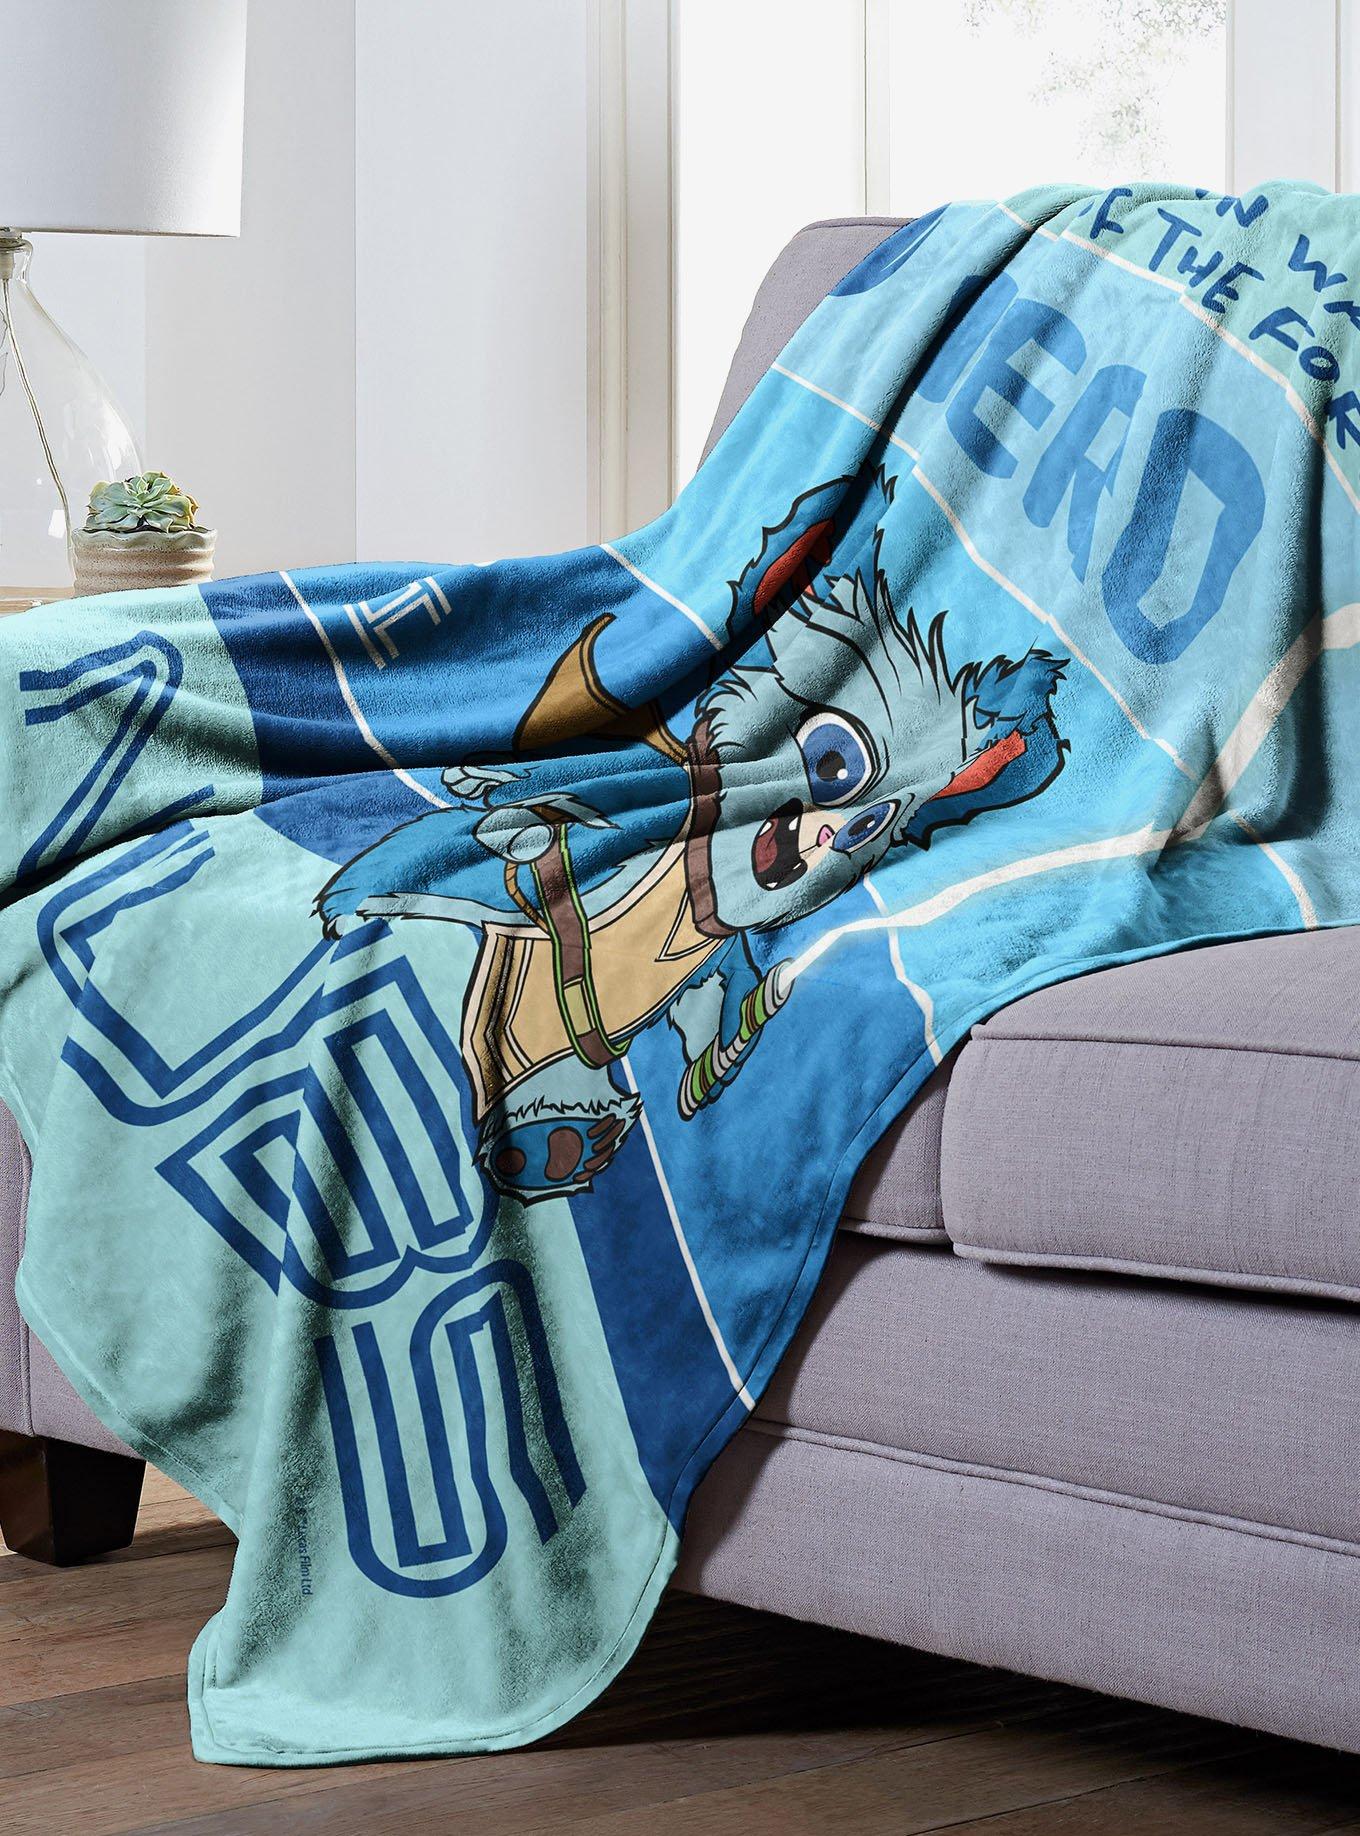 Star Wars Young Jedi Nubs Silk Touch Blanket, , hi-res